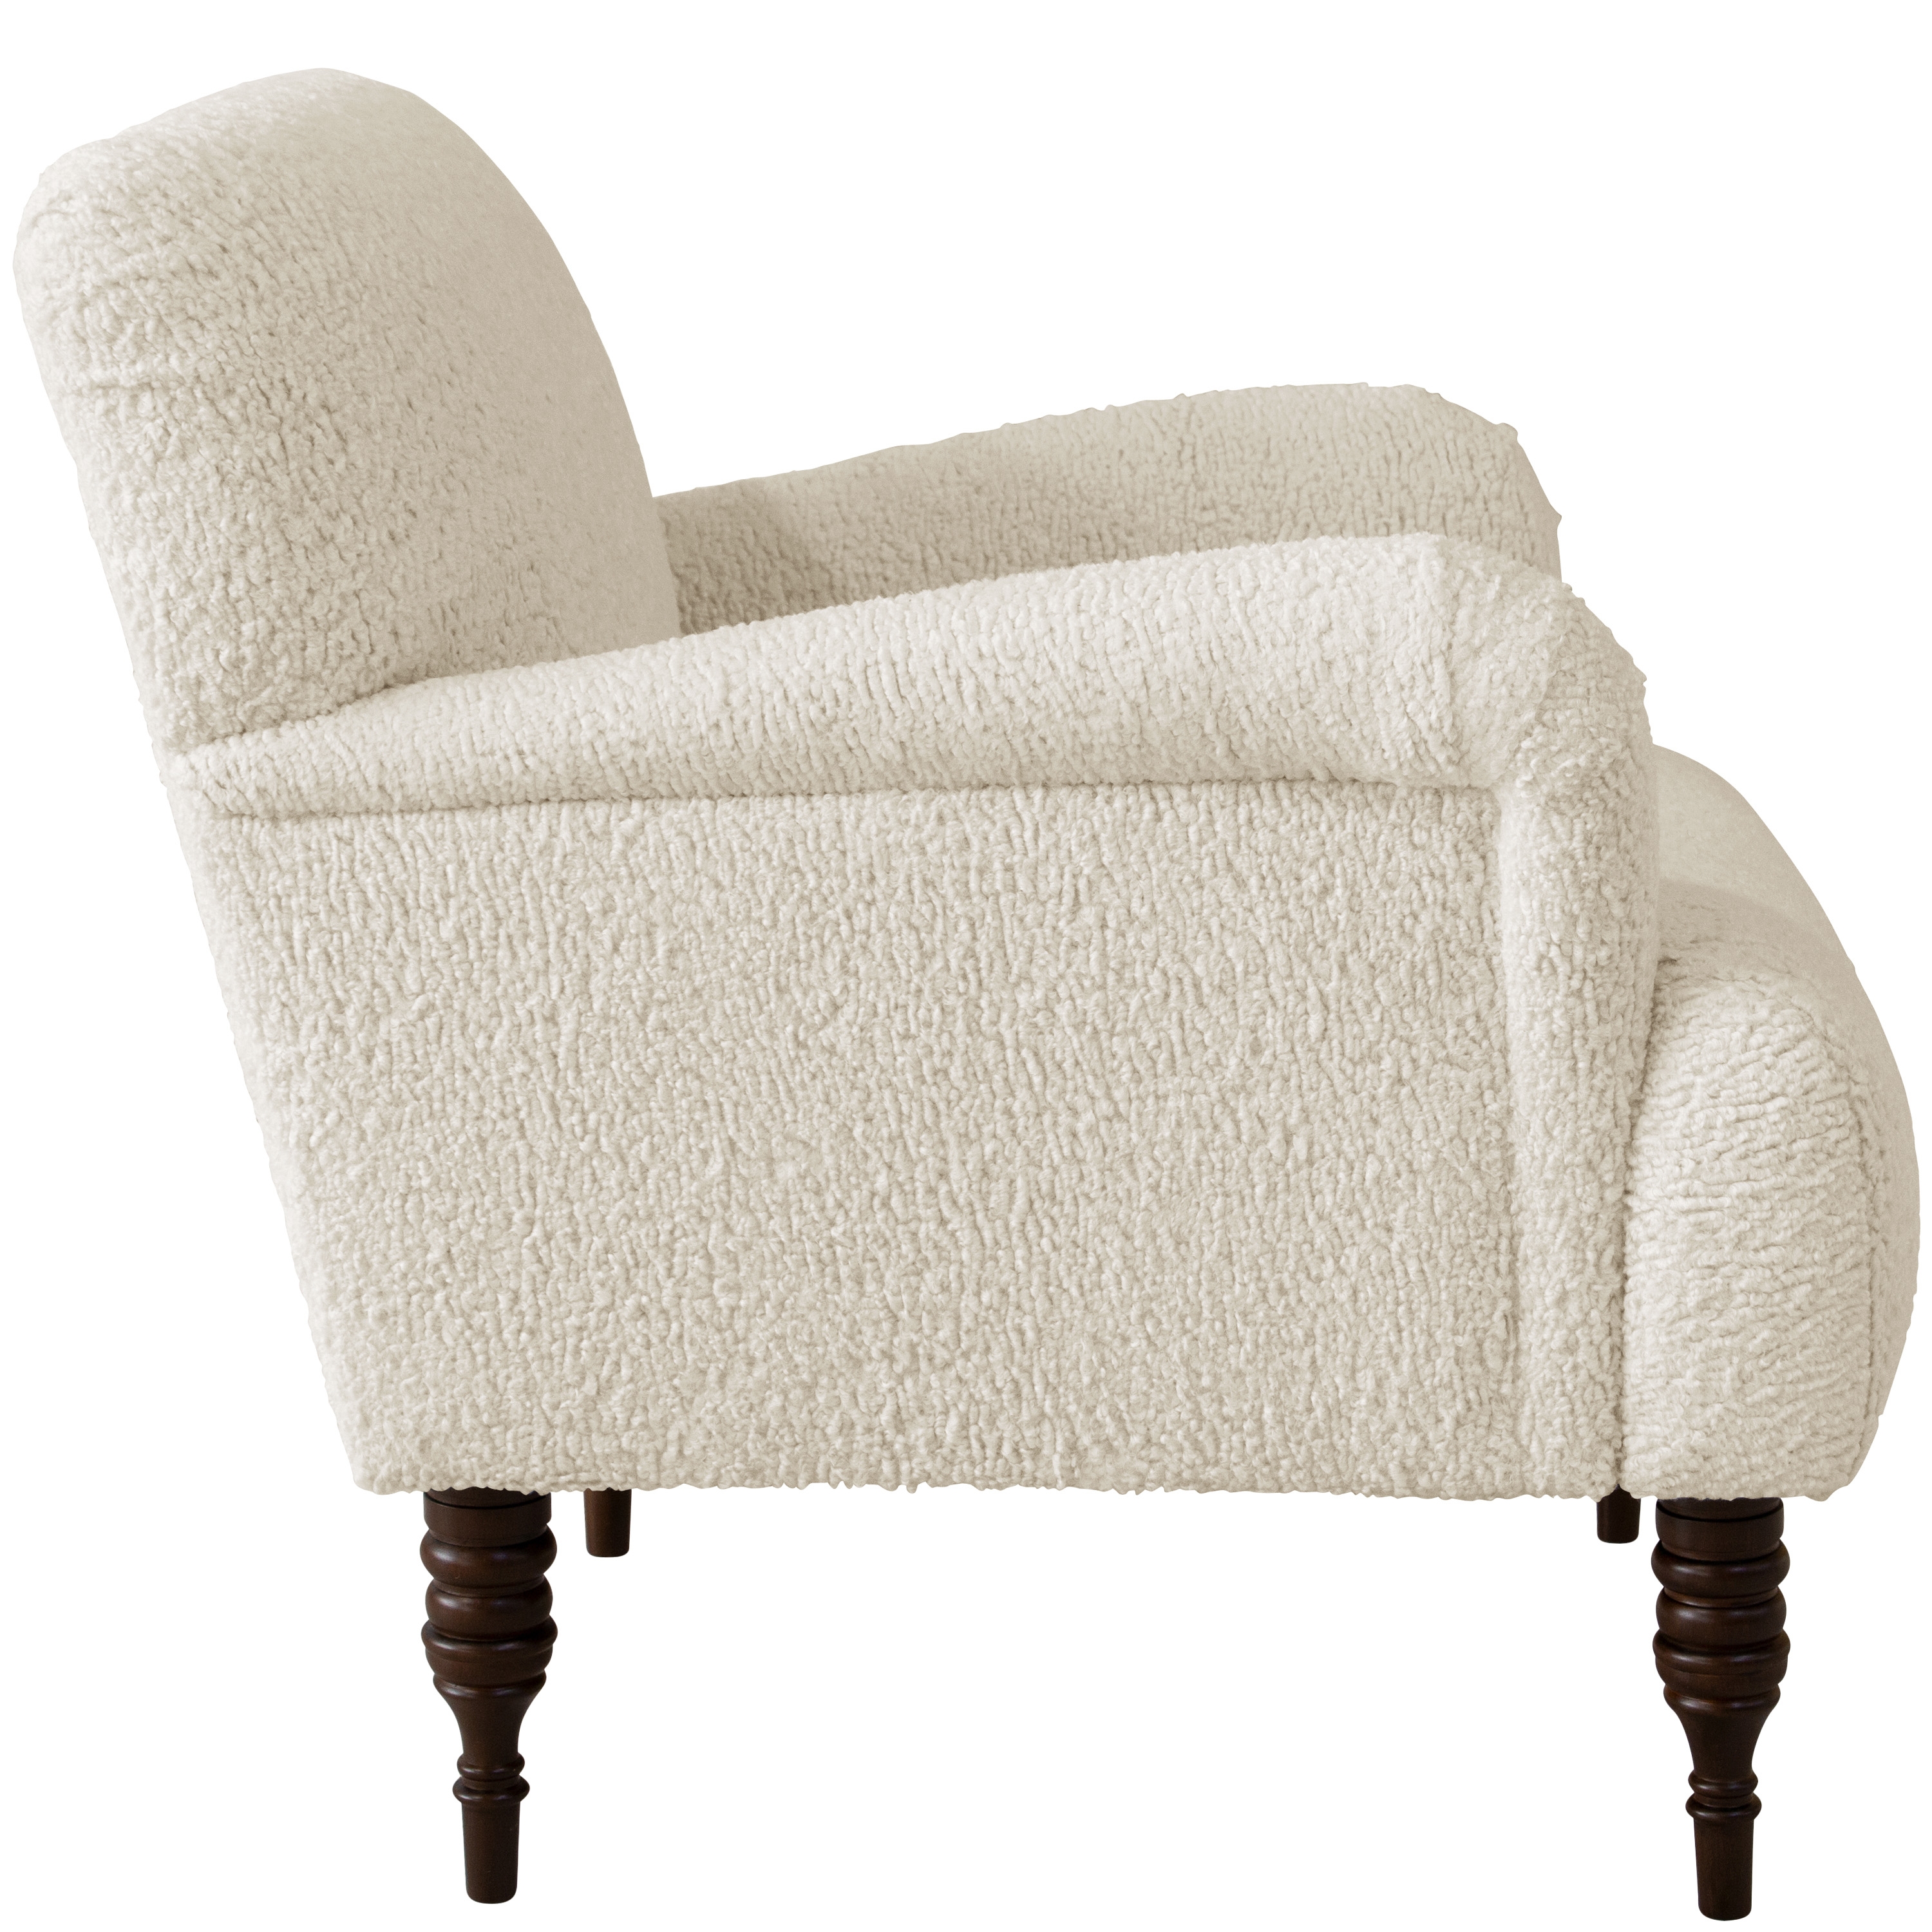 Norwood Chair in Sheepskin Natural - Image 2